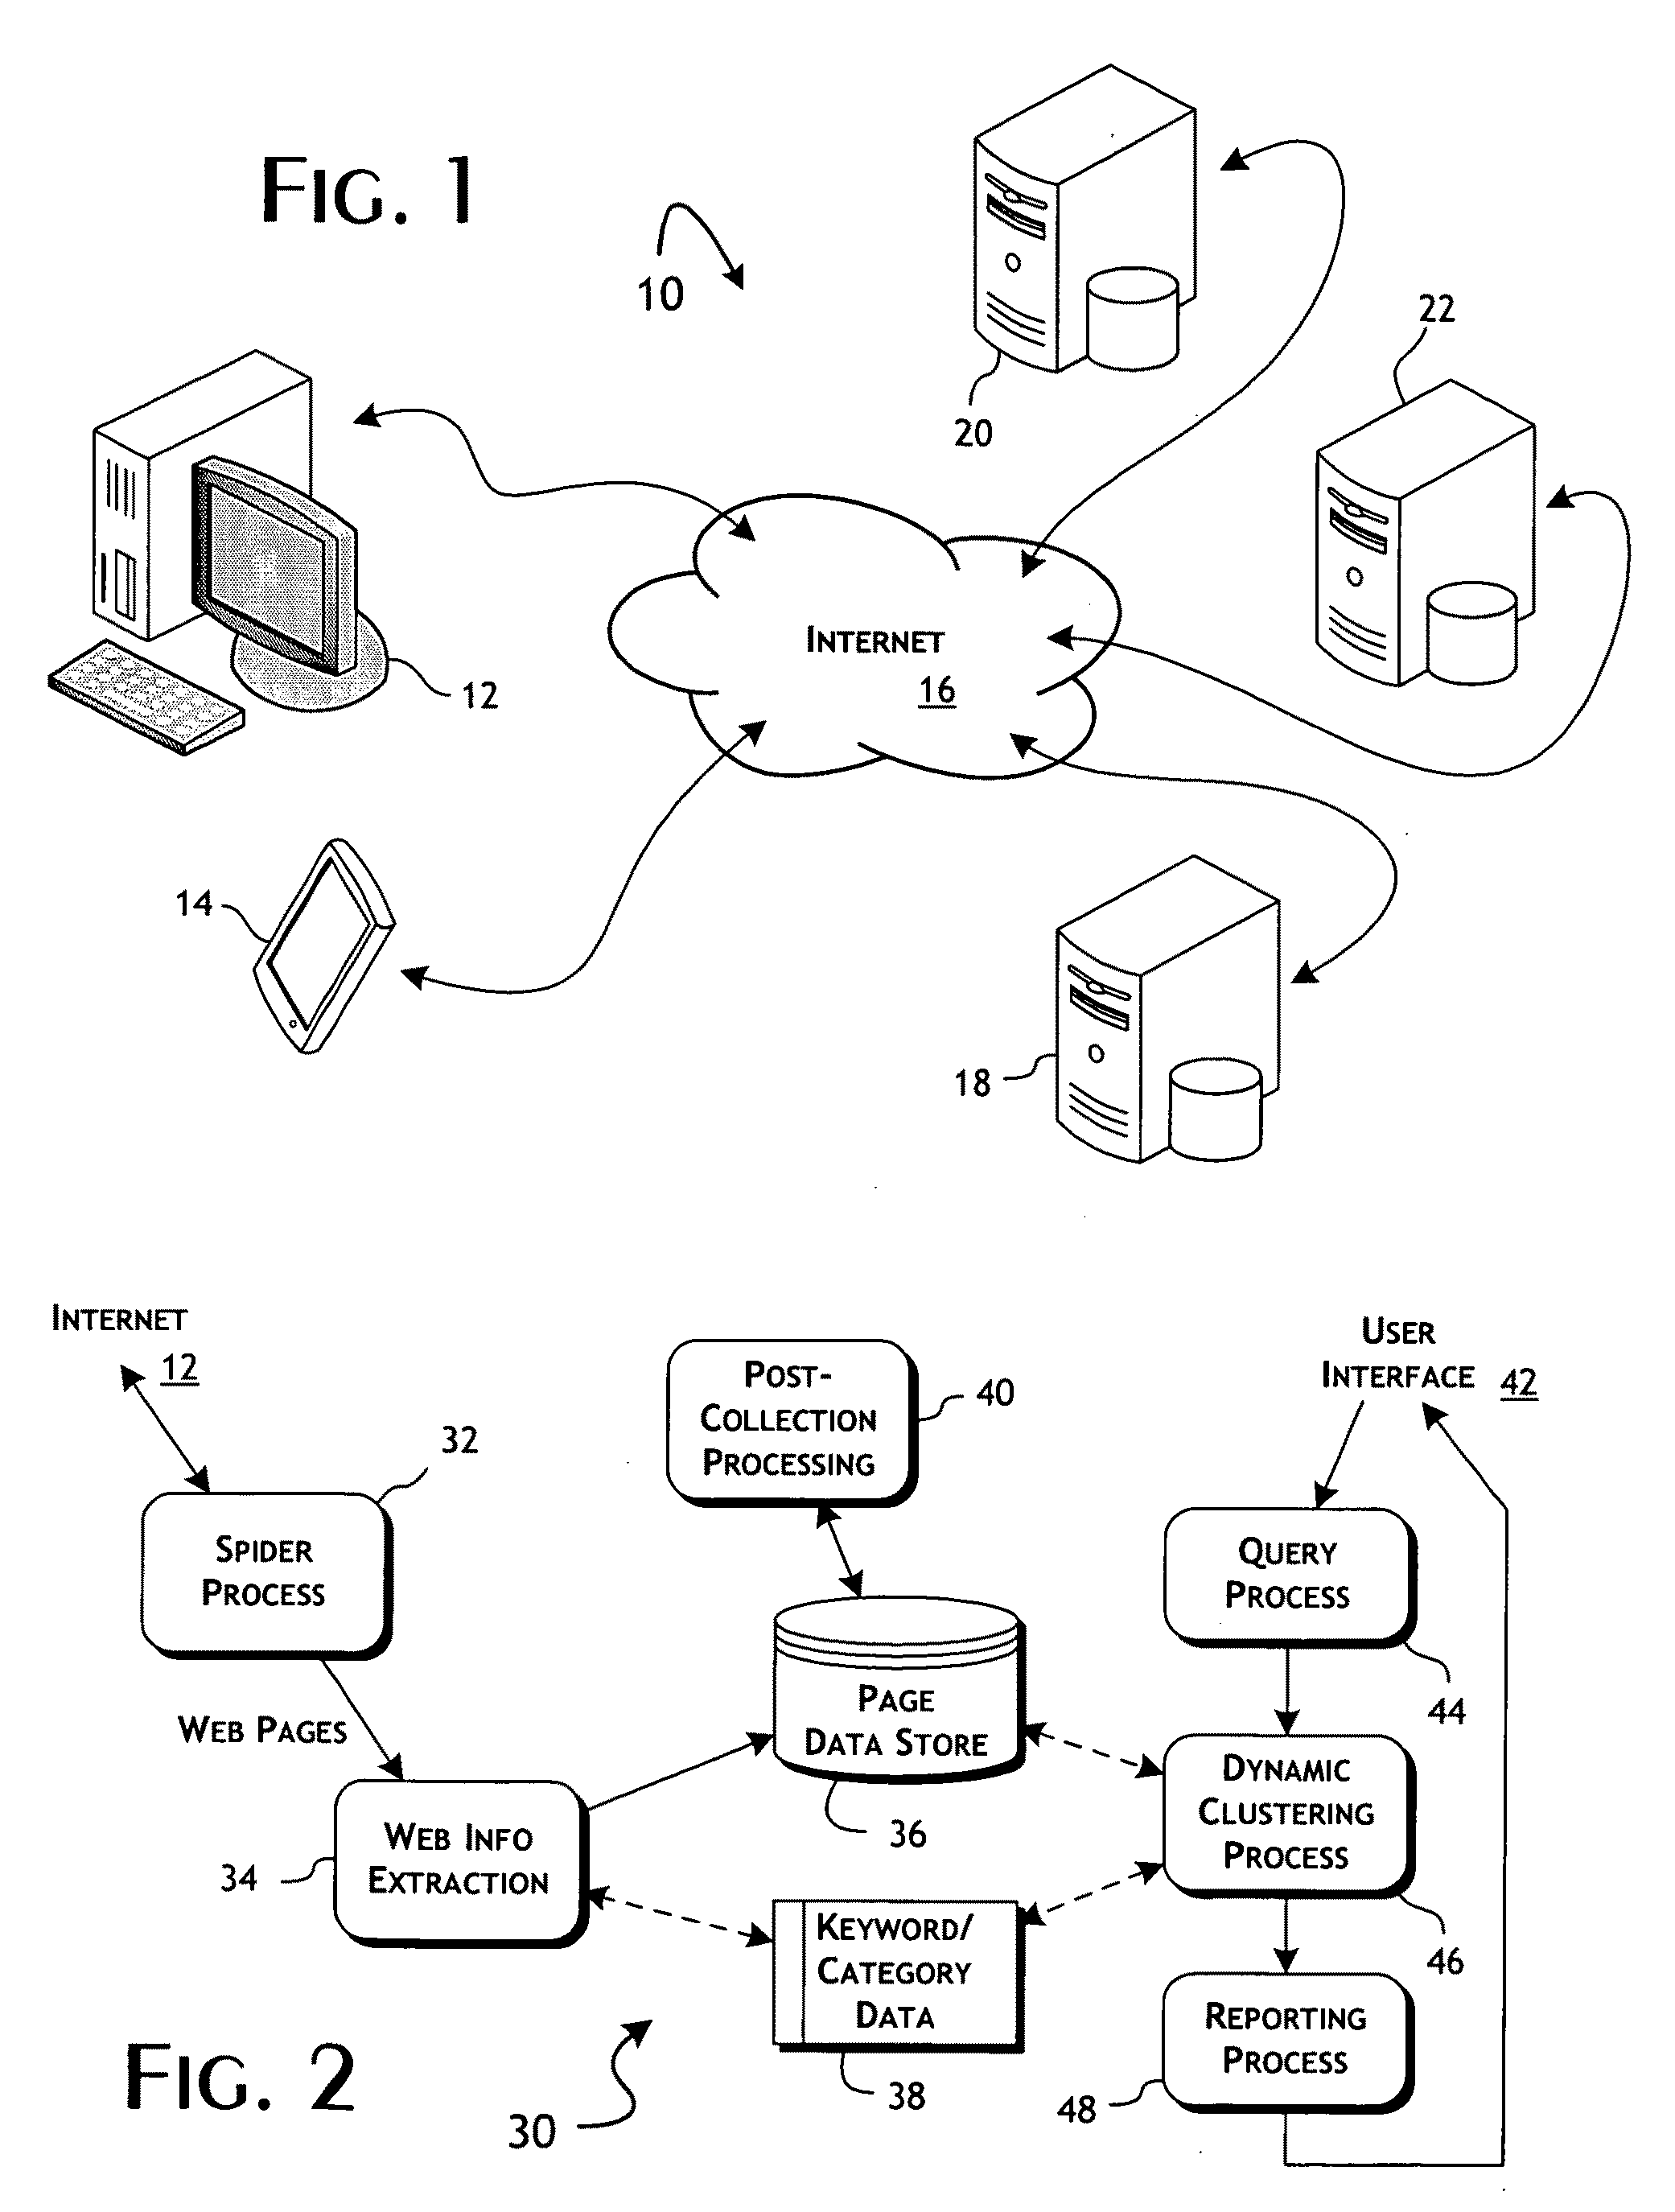 System and methods for automatic clustering of ranked and categorized search objects